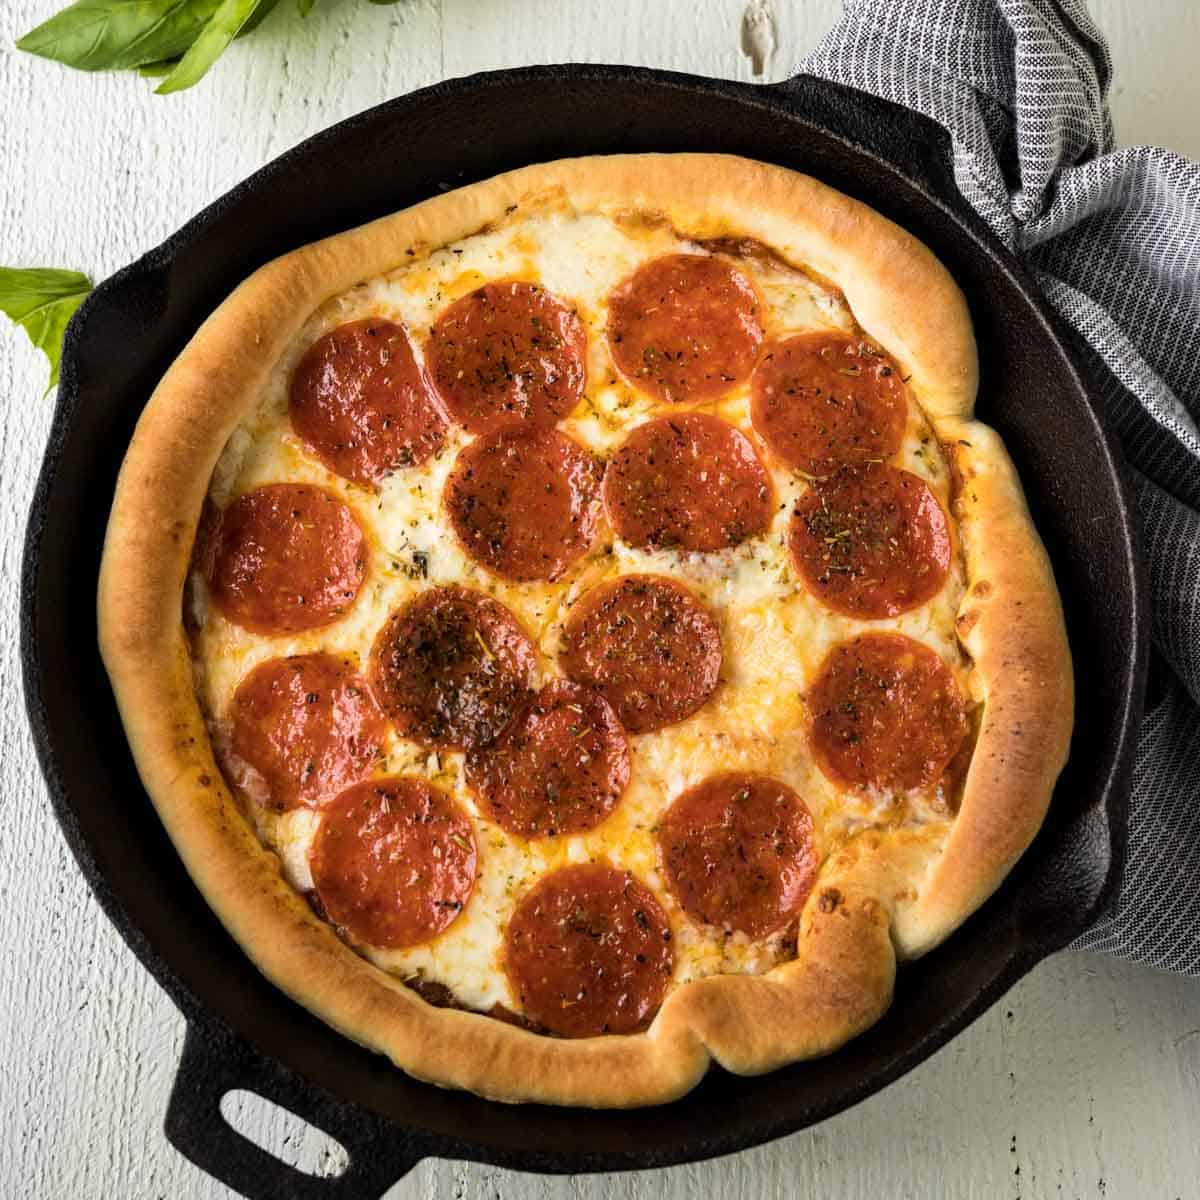 30 Minute Cast Iron Skillet Pizza Recipe - Pitchfork Foodie Farms